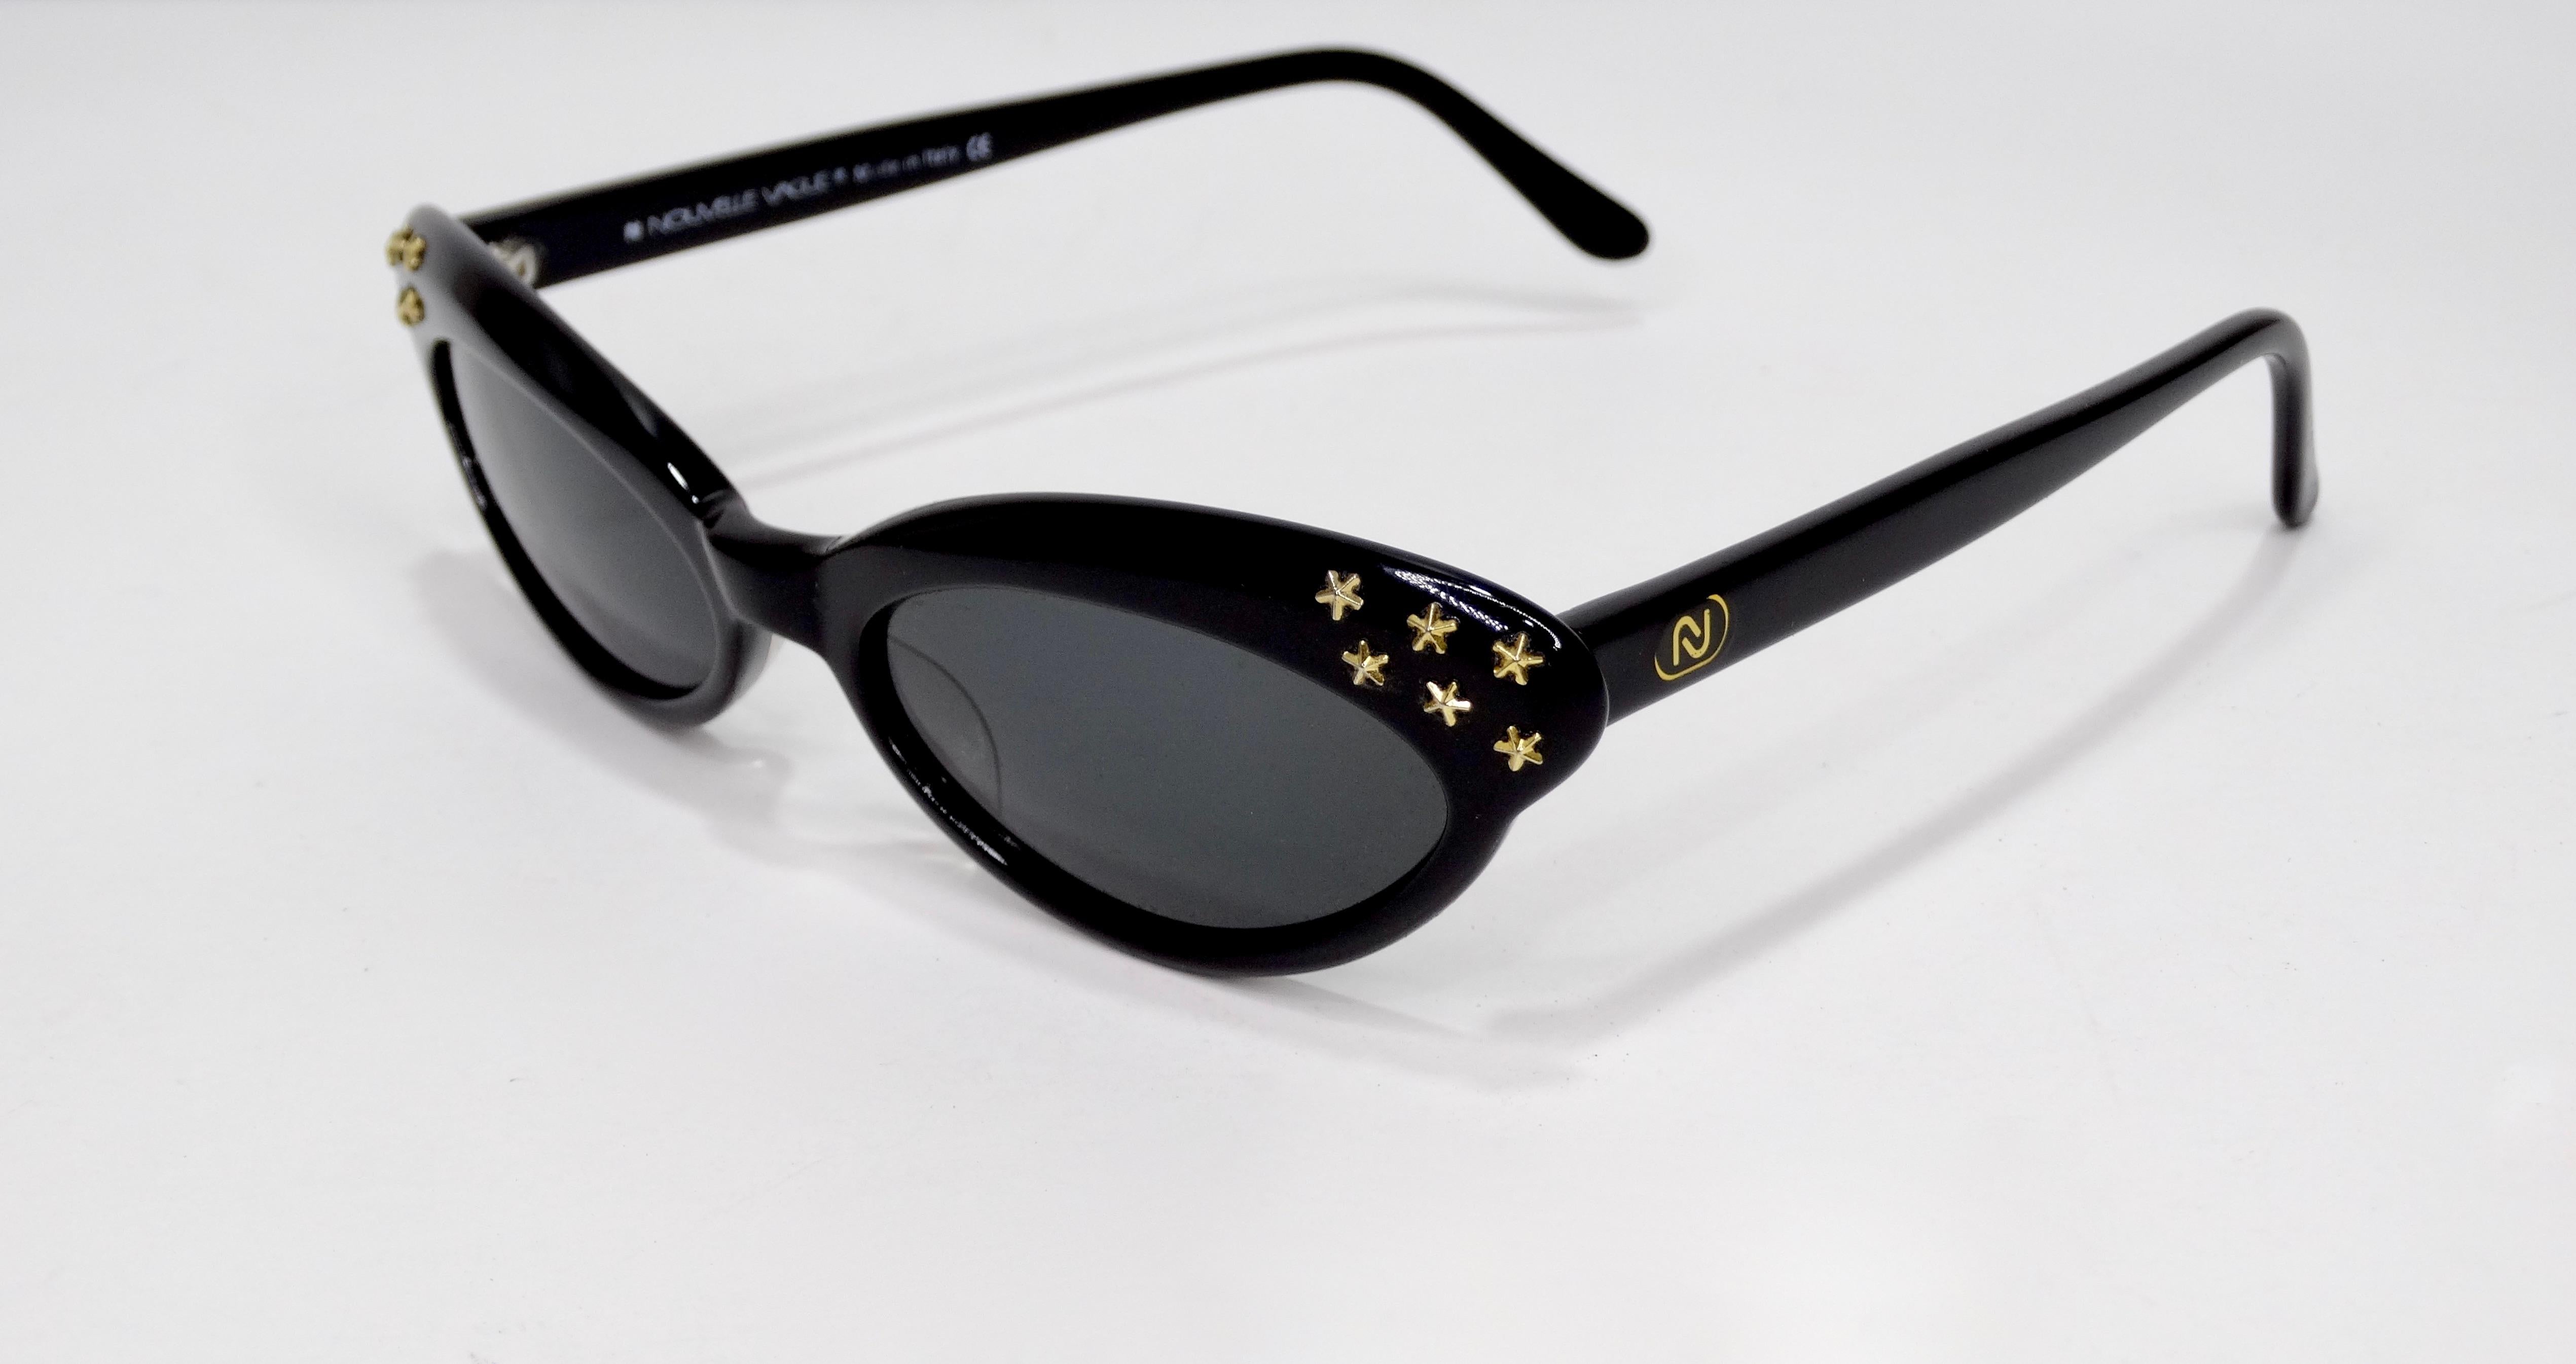 Elevate your look with these adorable late 1980s/early 1990s Nouvelle Vague sunglasses! Feature a cat eye frame with mini gold stars and black lenses. The perfect accessory to tie your together all your looks! Comes with original case. Stamped made